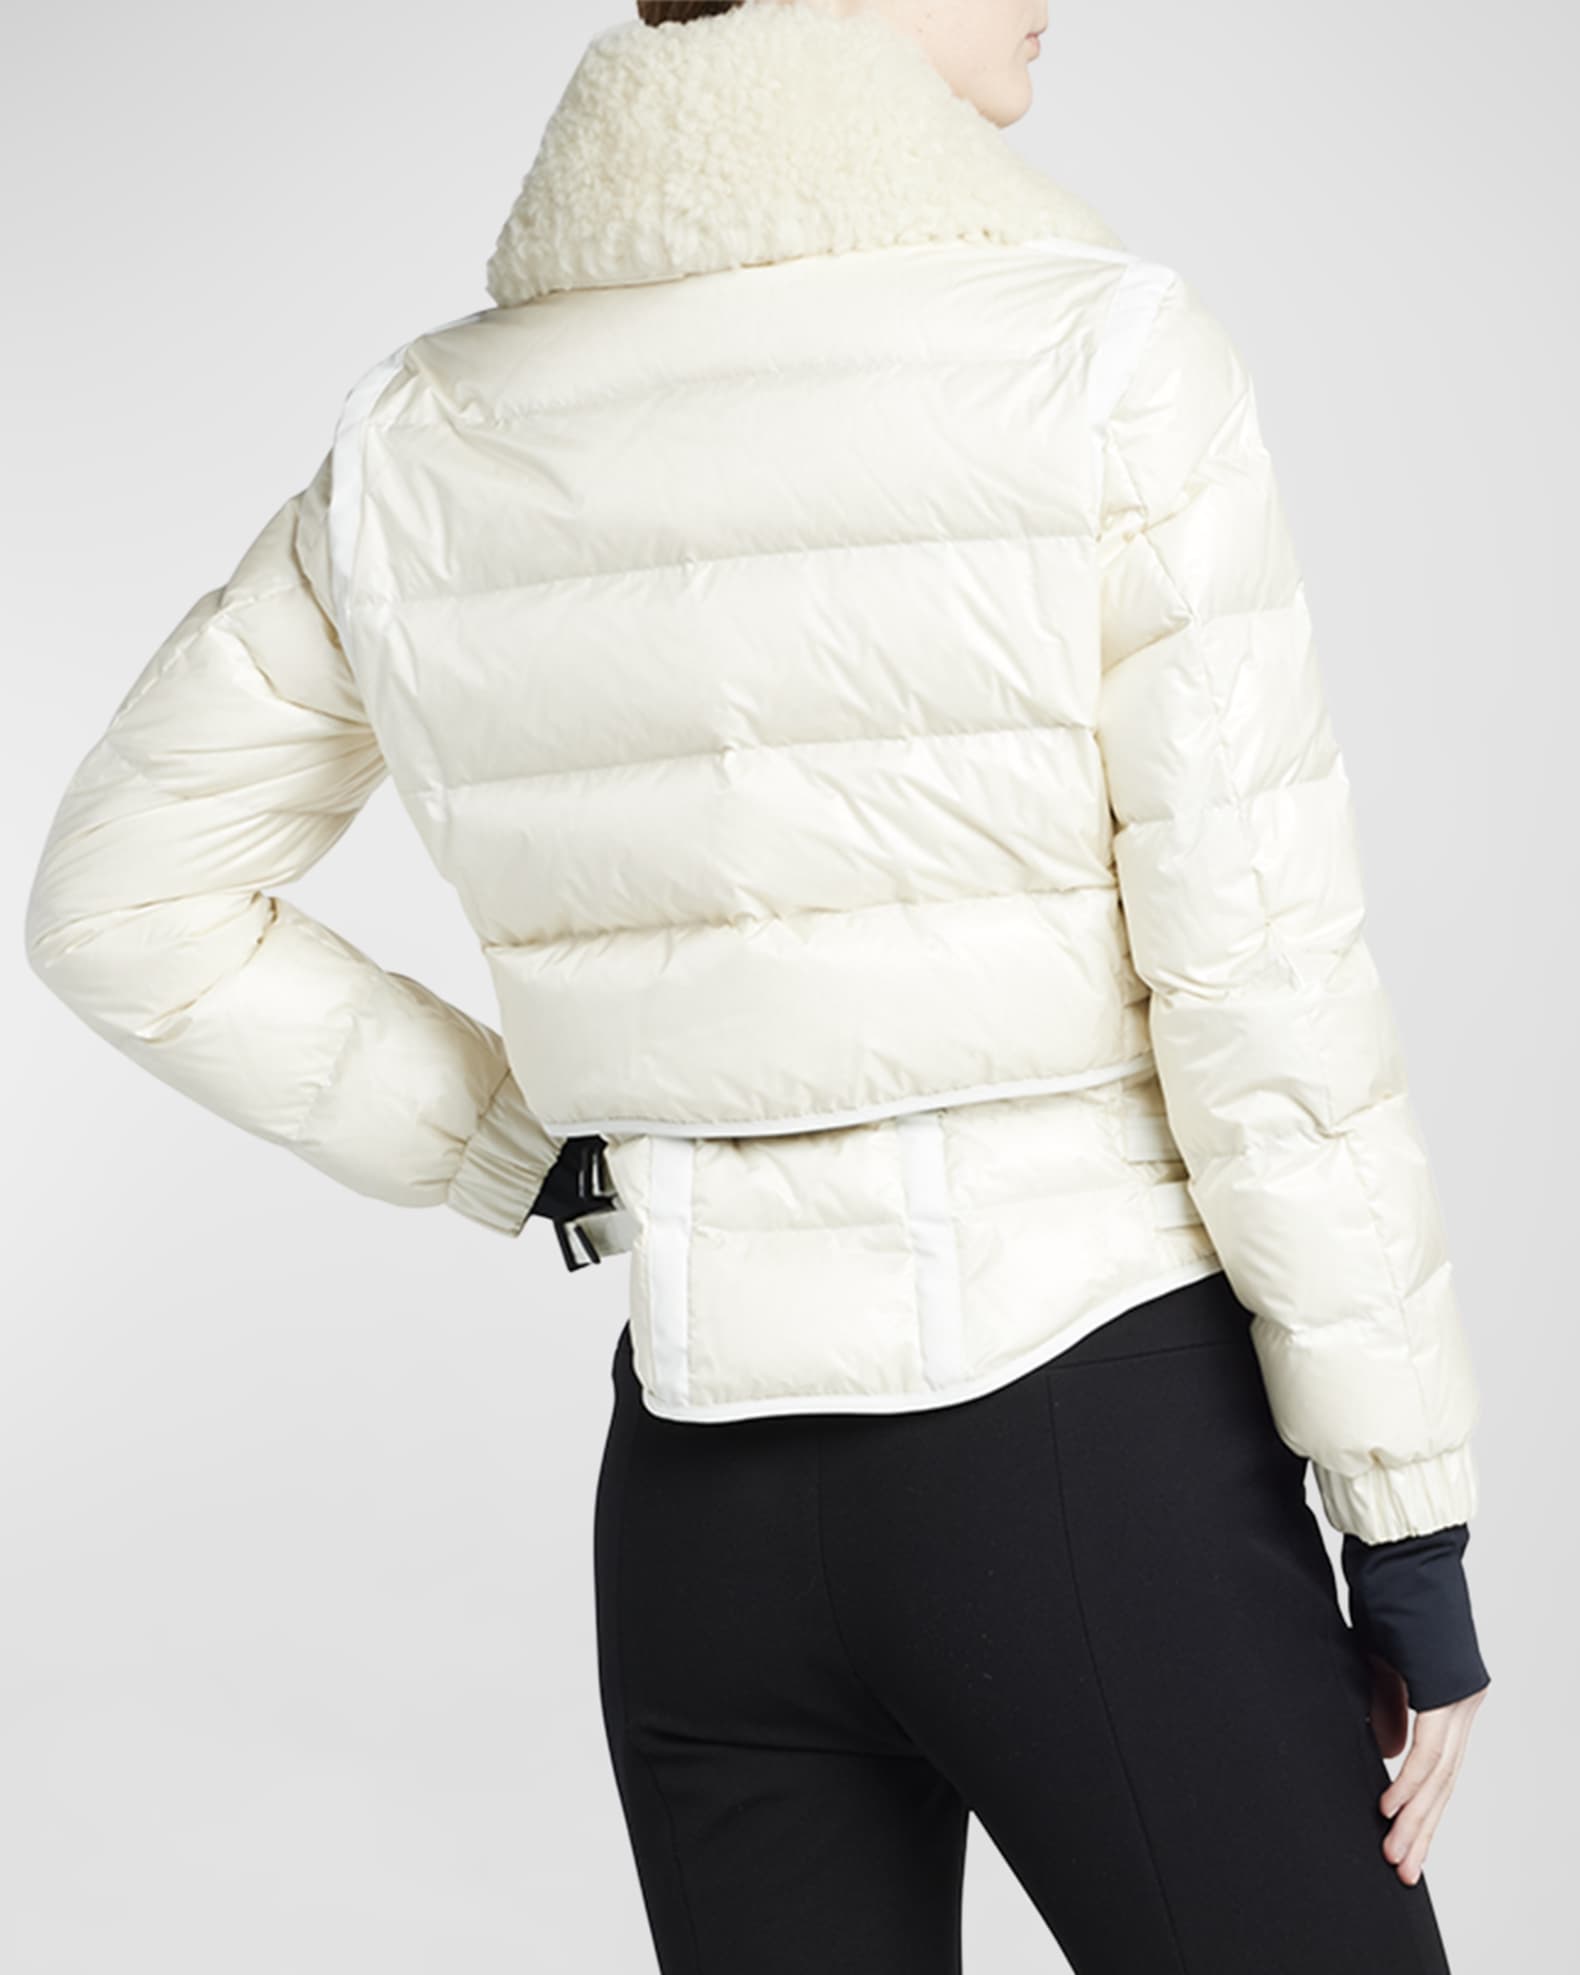 Moncler Grenoble Plantrey Quilted Down Jacket with Belt - Bergdorf Goodman